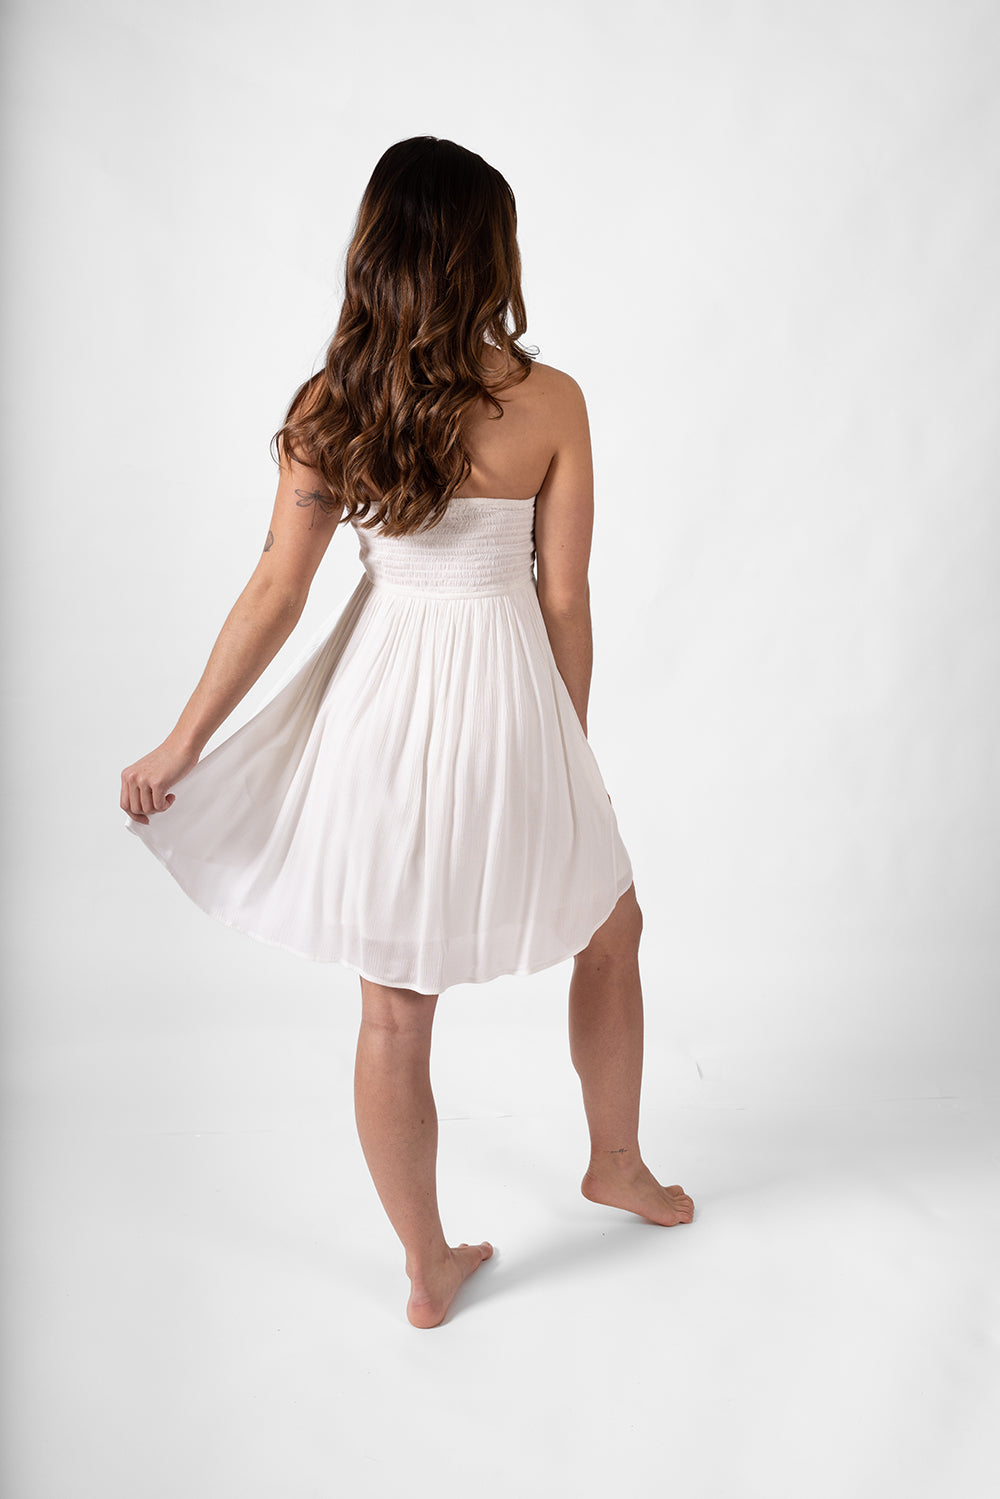 the back of a brunette woman model wearing a white beachy bandeau mini dress with one hand on the edge of the dress to show how flowy it is